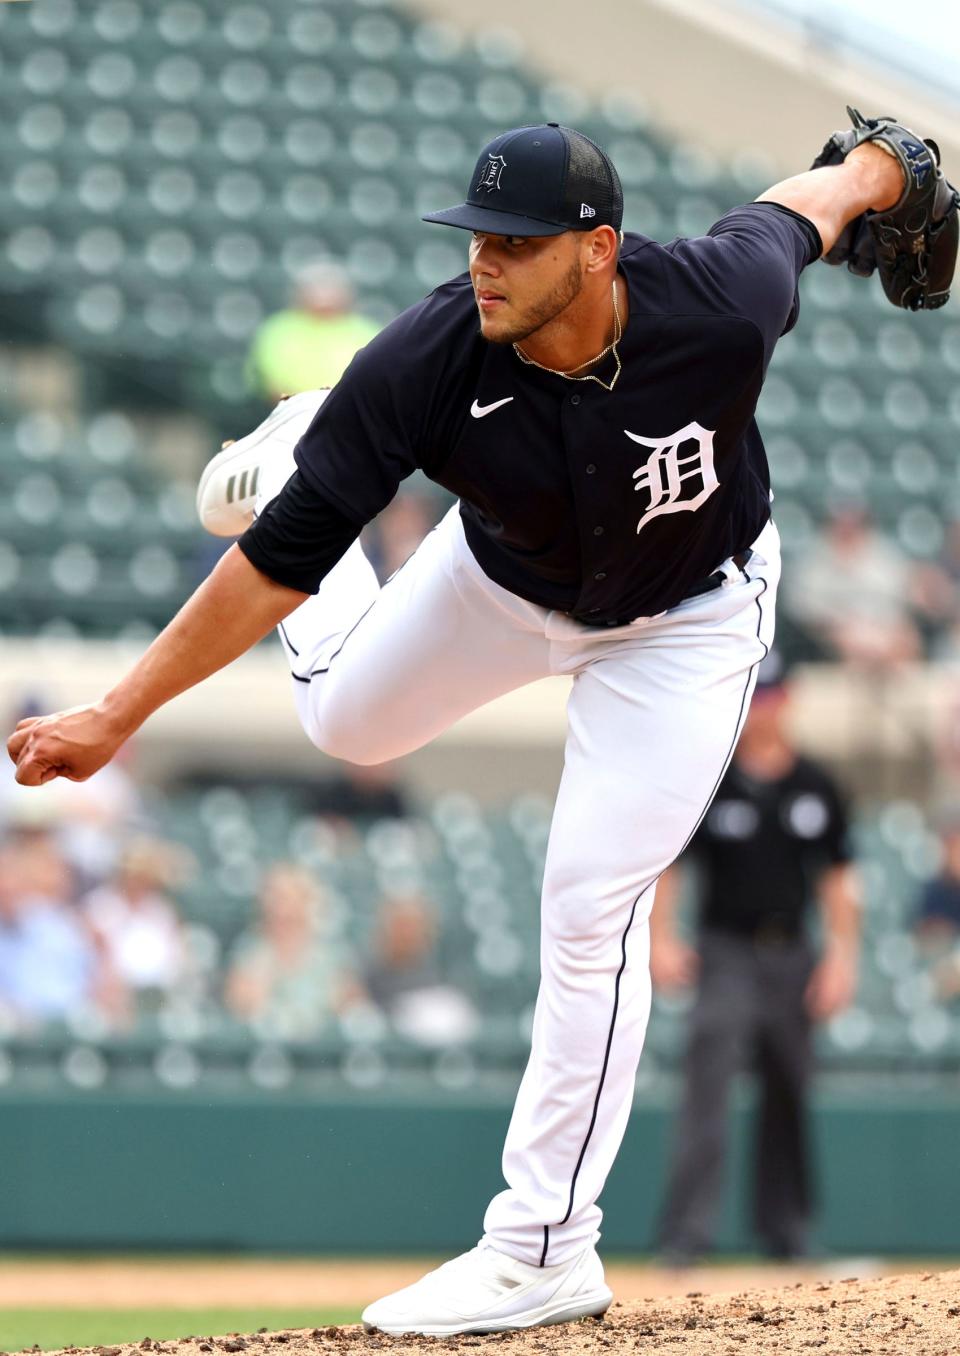 Tigers pitcher Joe Jimenez (77) throws a pitch during the fourth inning against the Yankees during spring training March 24, 2022 at Publix Field at Joker Marchant Stadium in Lakeland, Florida.